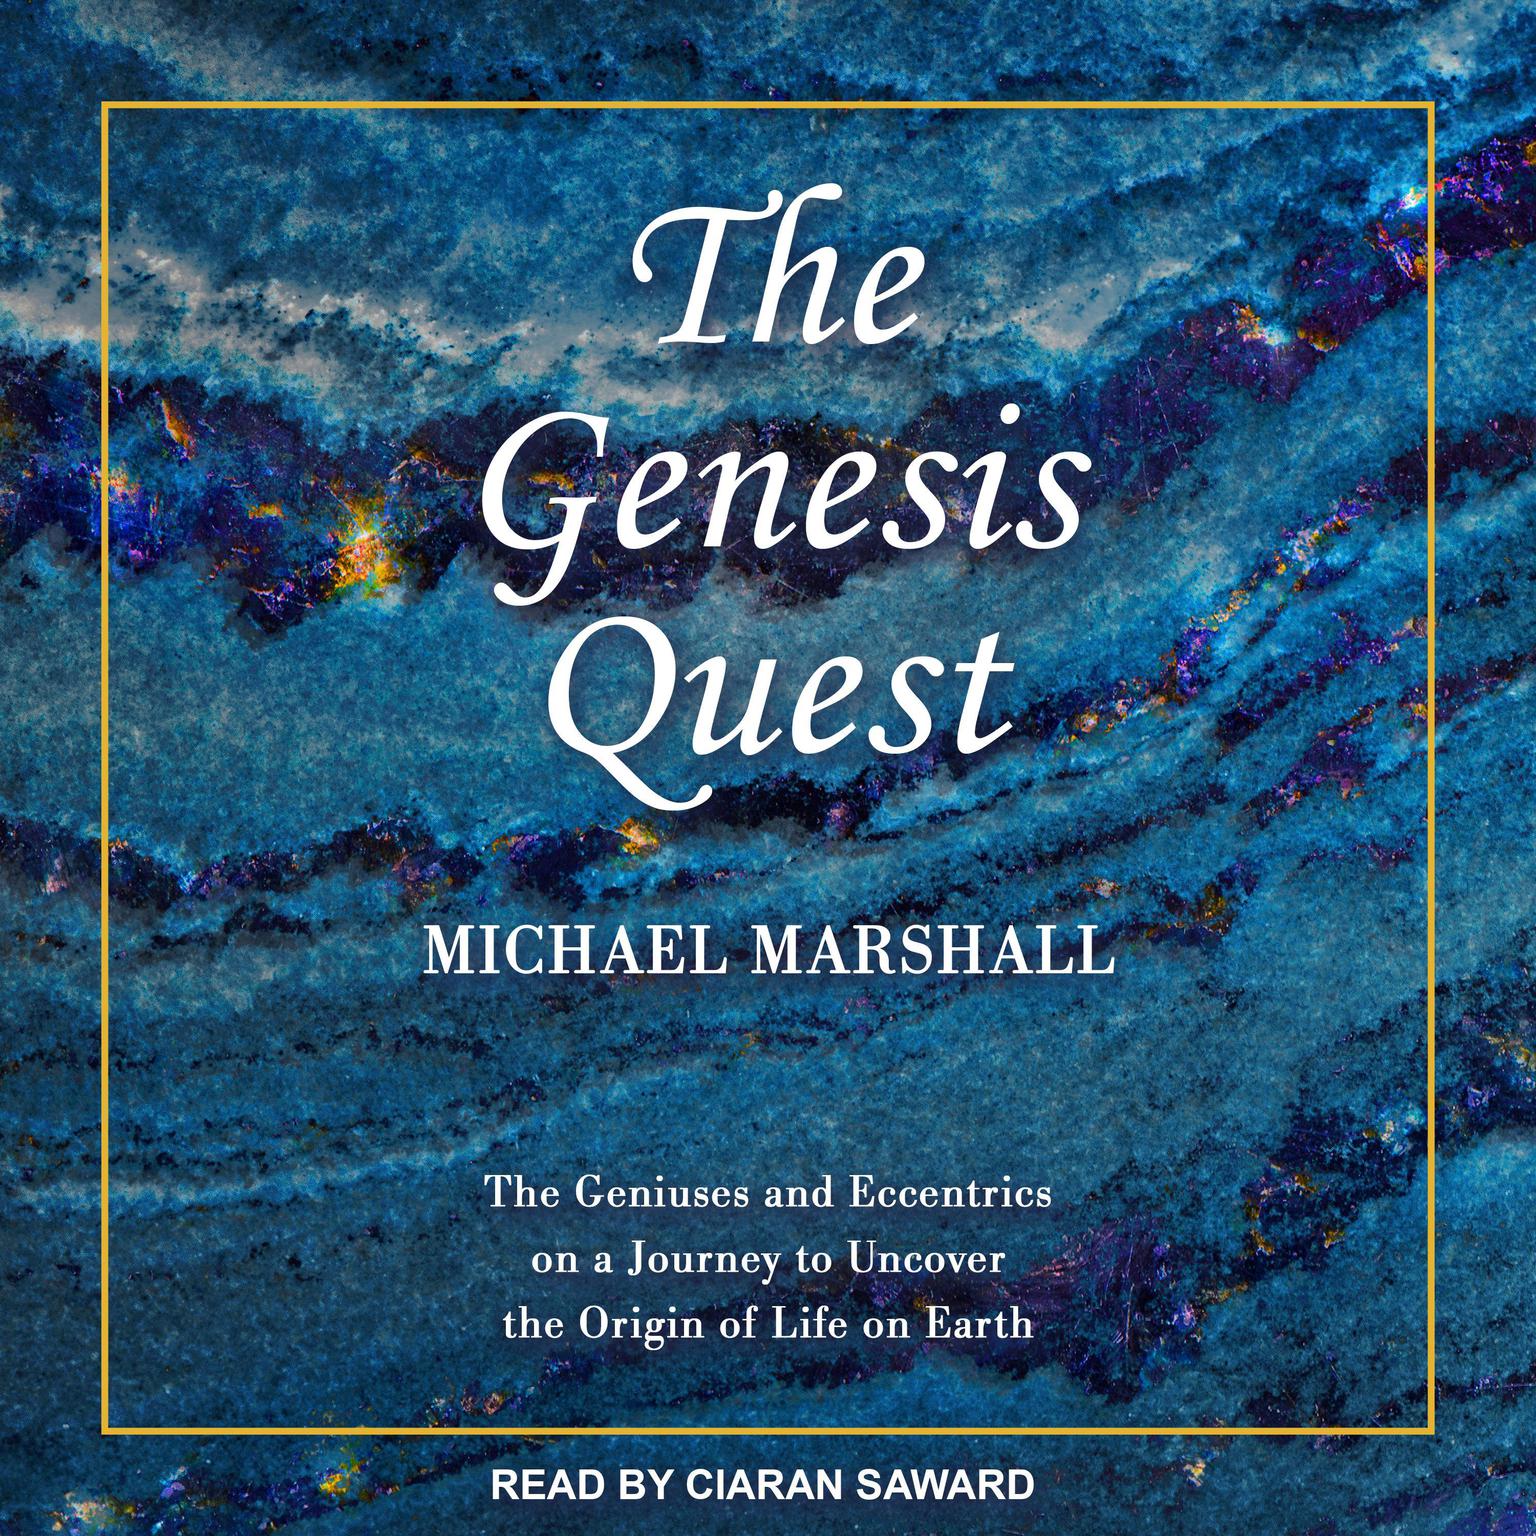 The Genesis Quest: The Geniuses and Eccentrics on a Journey to Uncover the Origin of Life on Earth Audiobook, by Michael Marshall